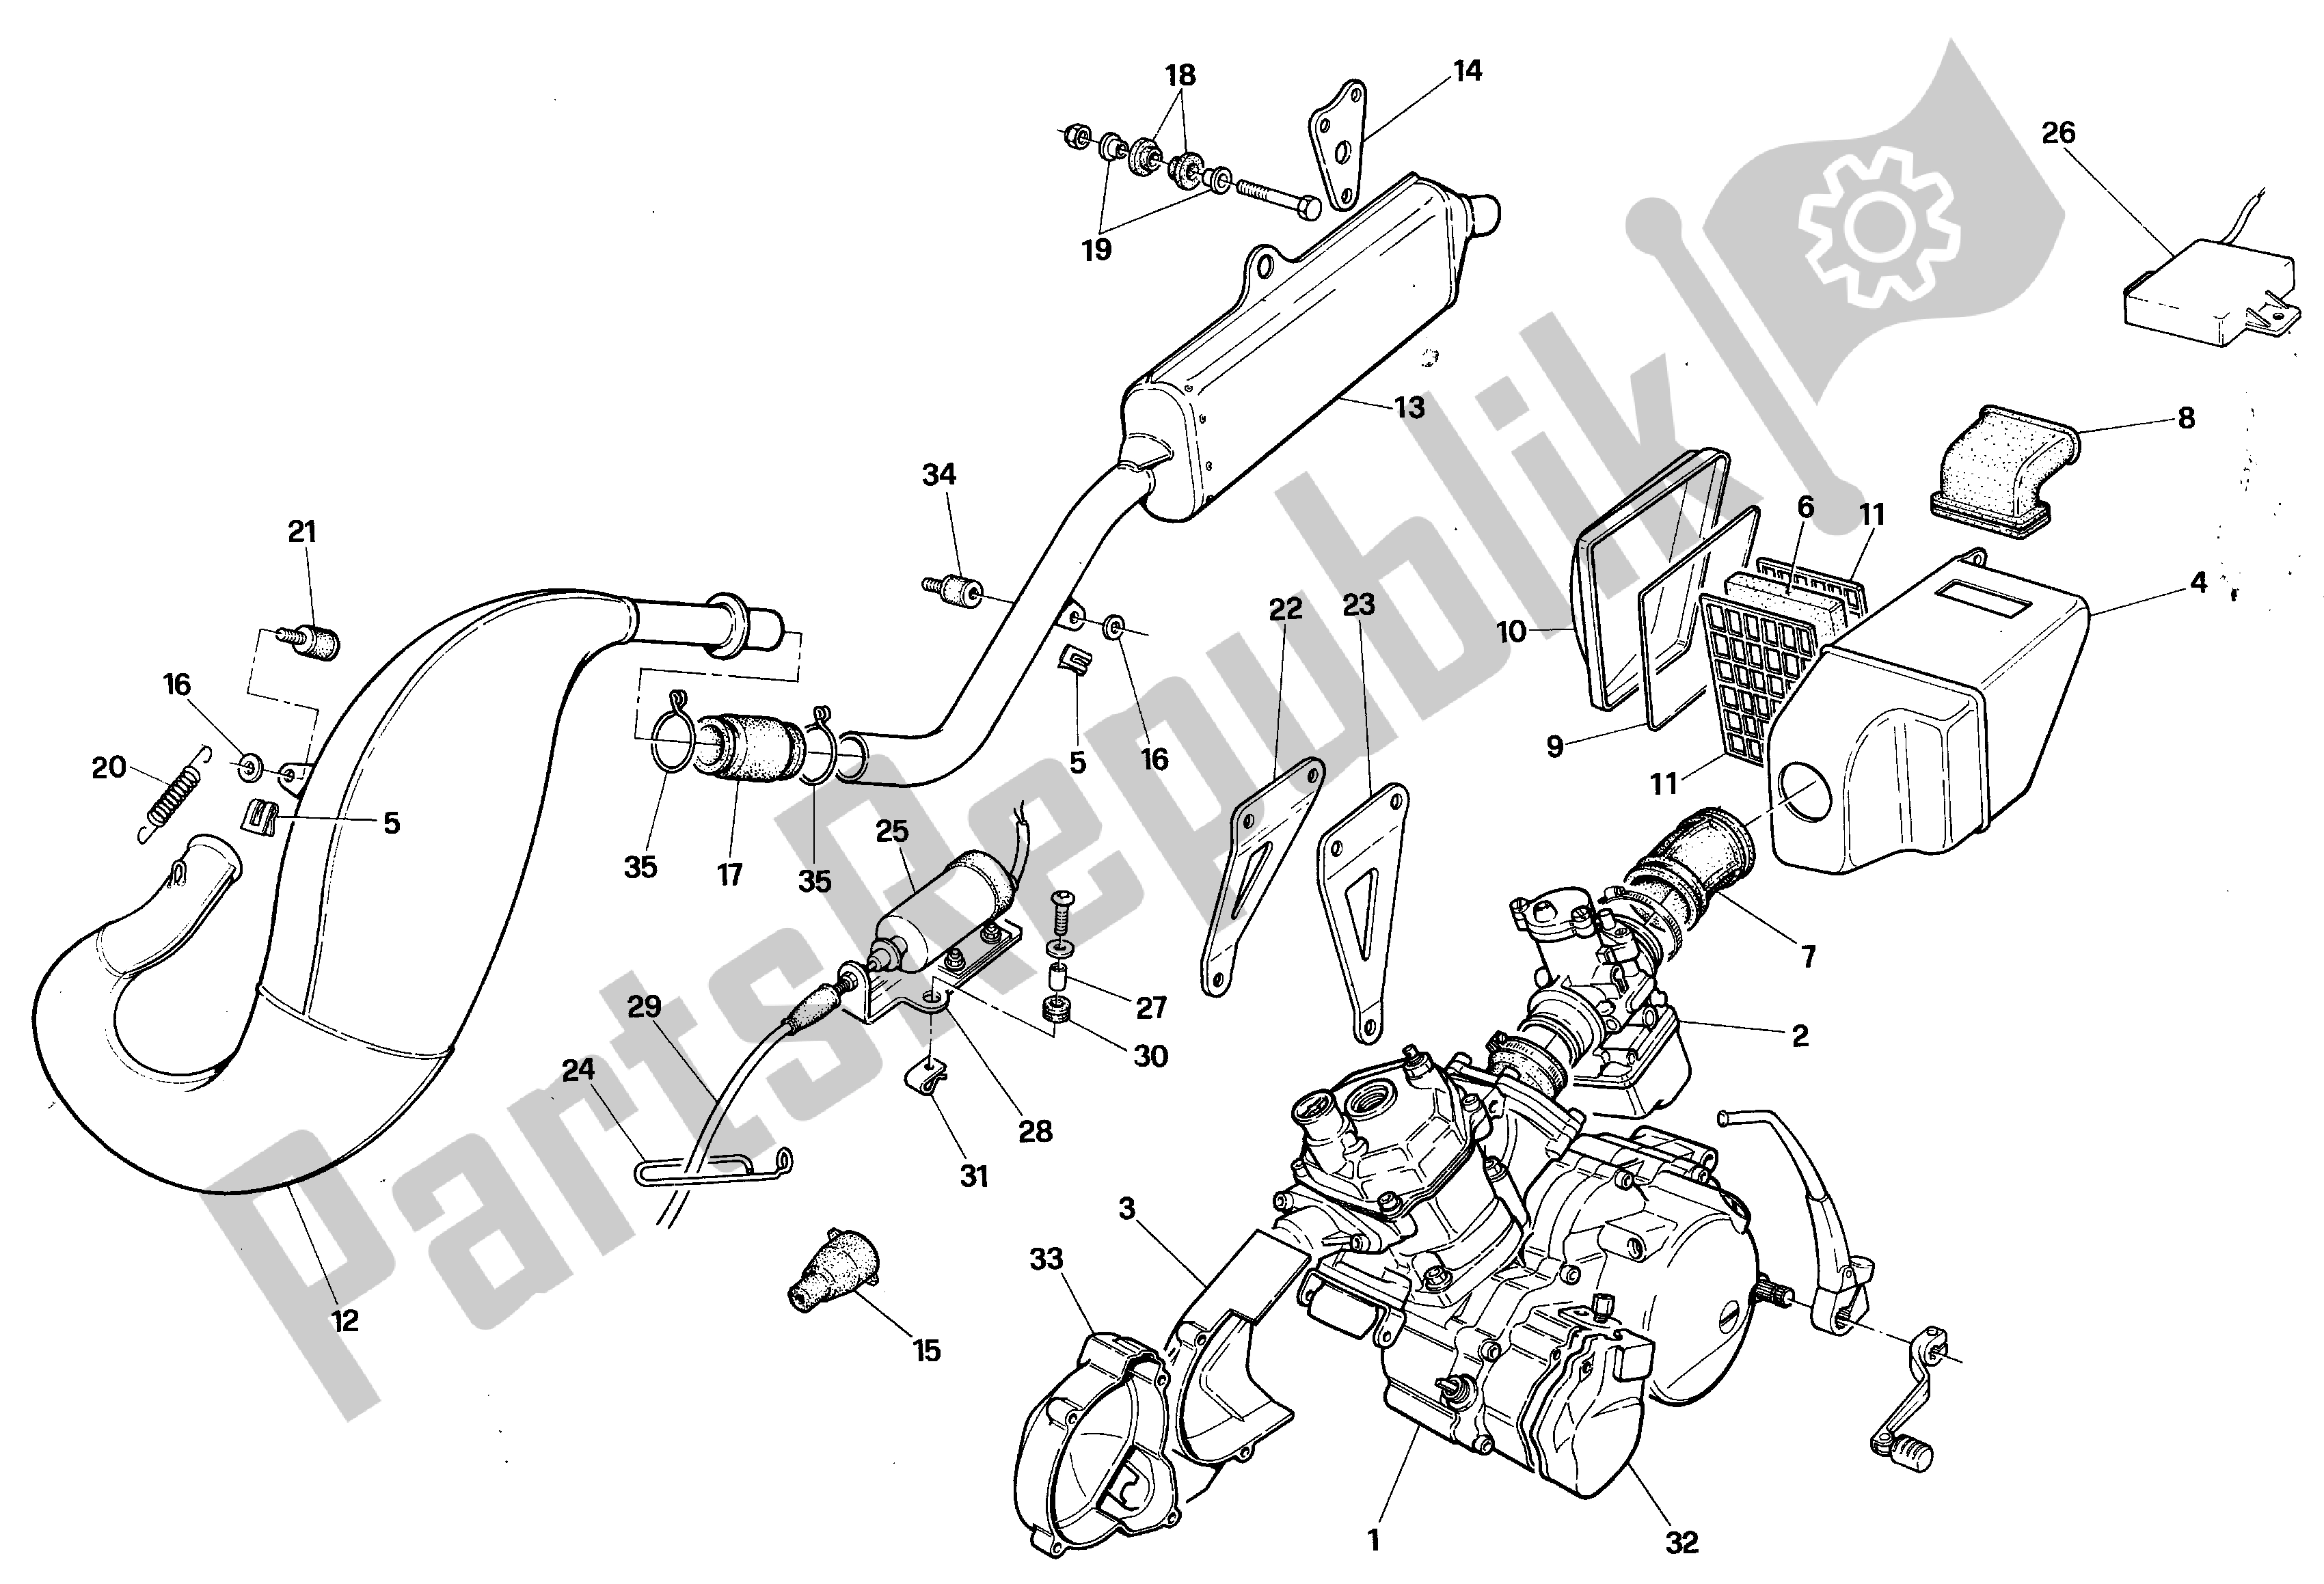 All parts for the Exhaust Assembly of the Aprilia RX 125 1994 - 1998